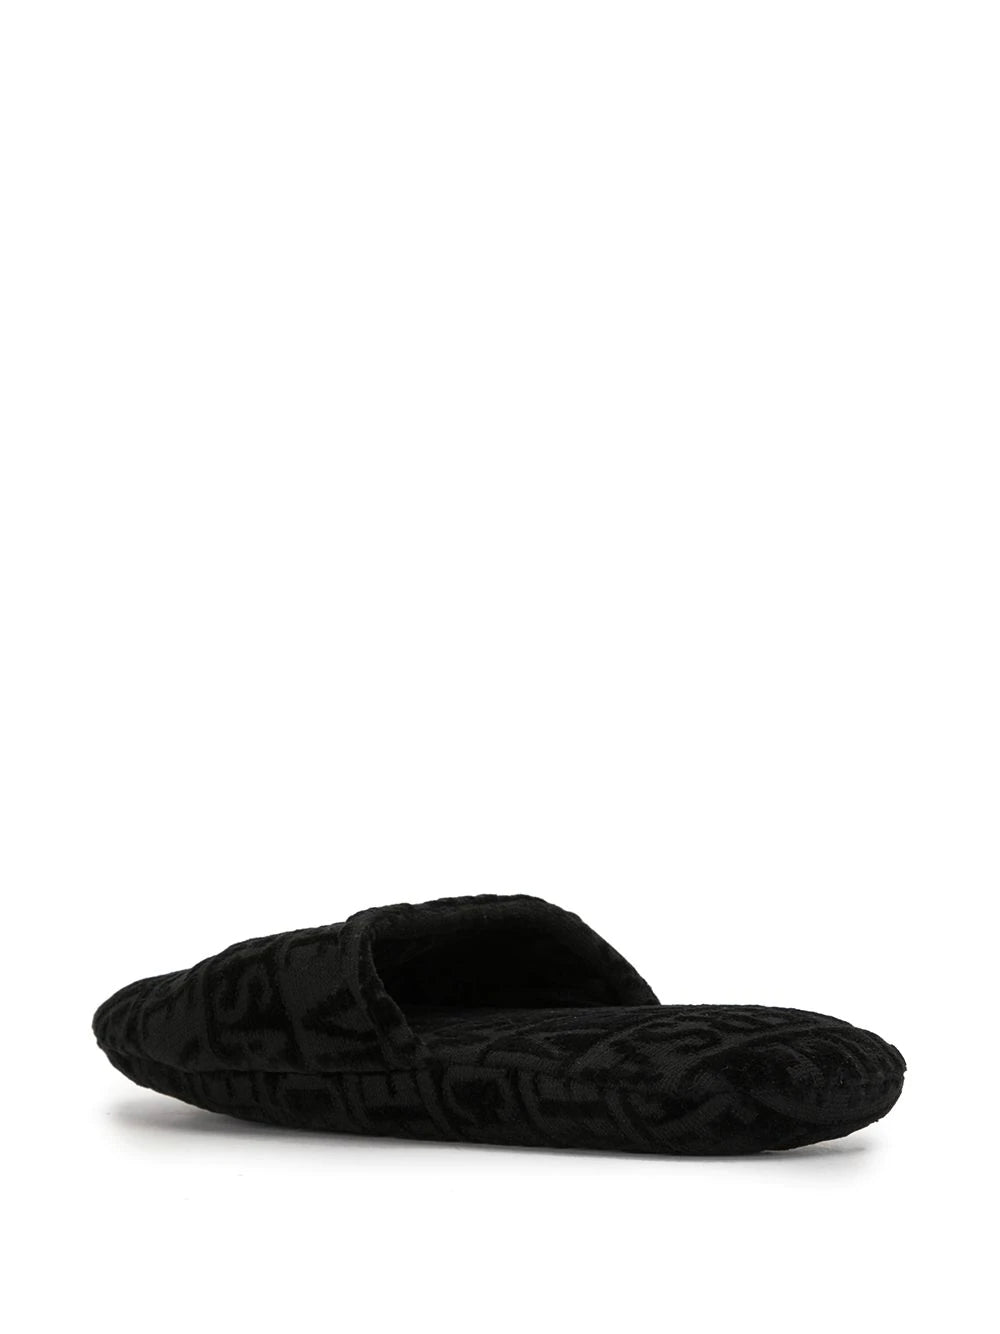 Versace Black Medusa Embroidered Terricloth Slippers